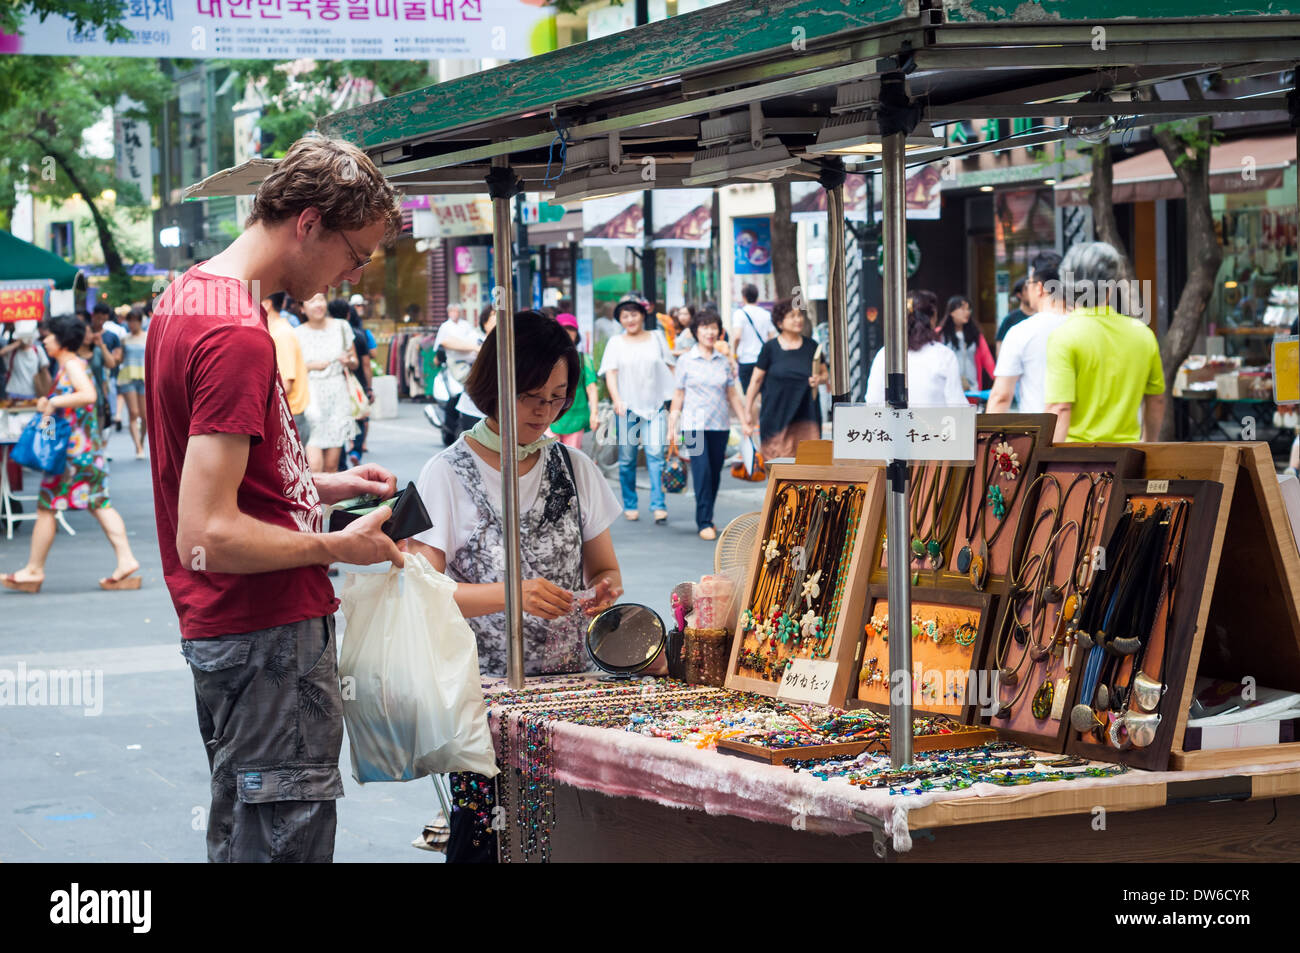 A tourist pays for some jewelry at a street vendor in Insadong, Seoul. Stock Photo